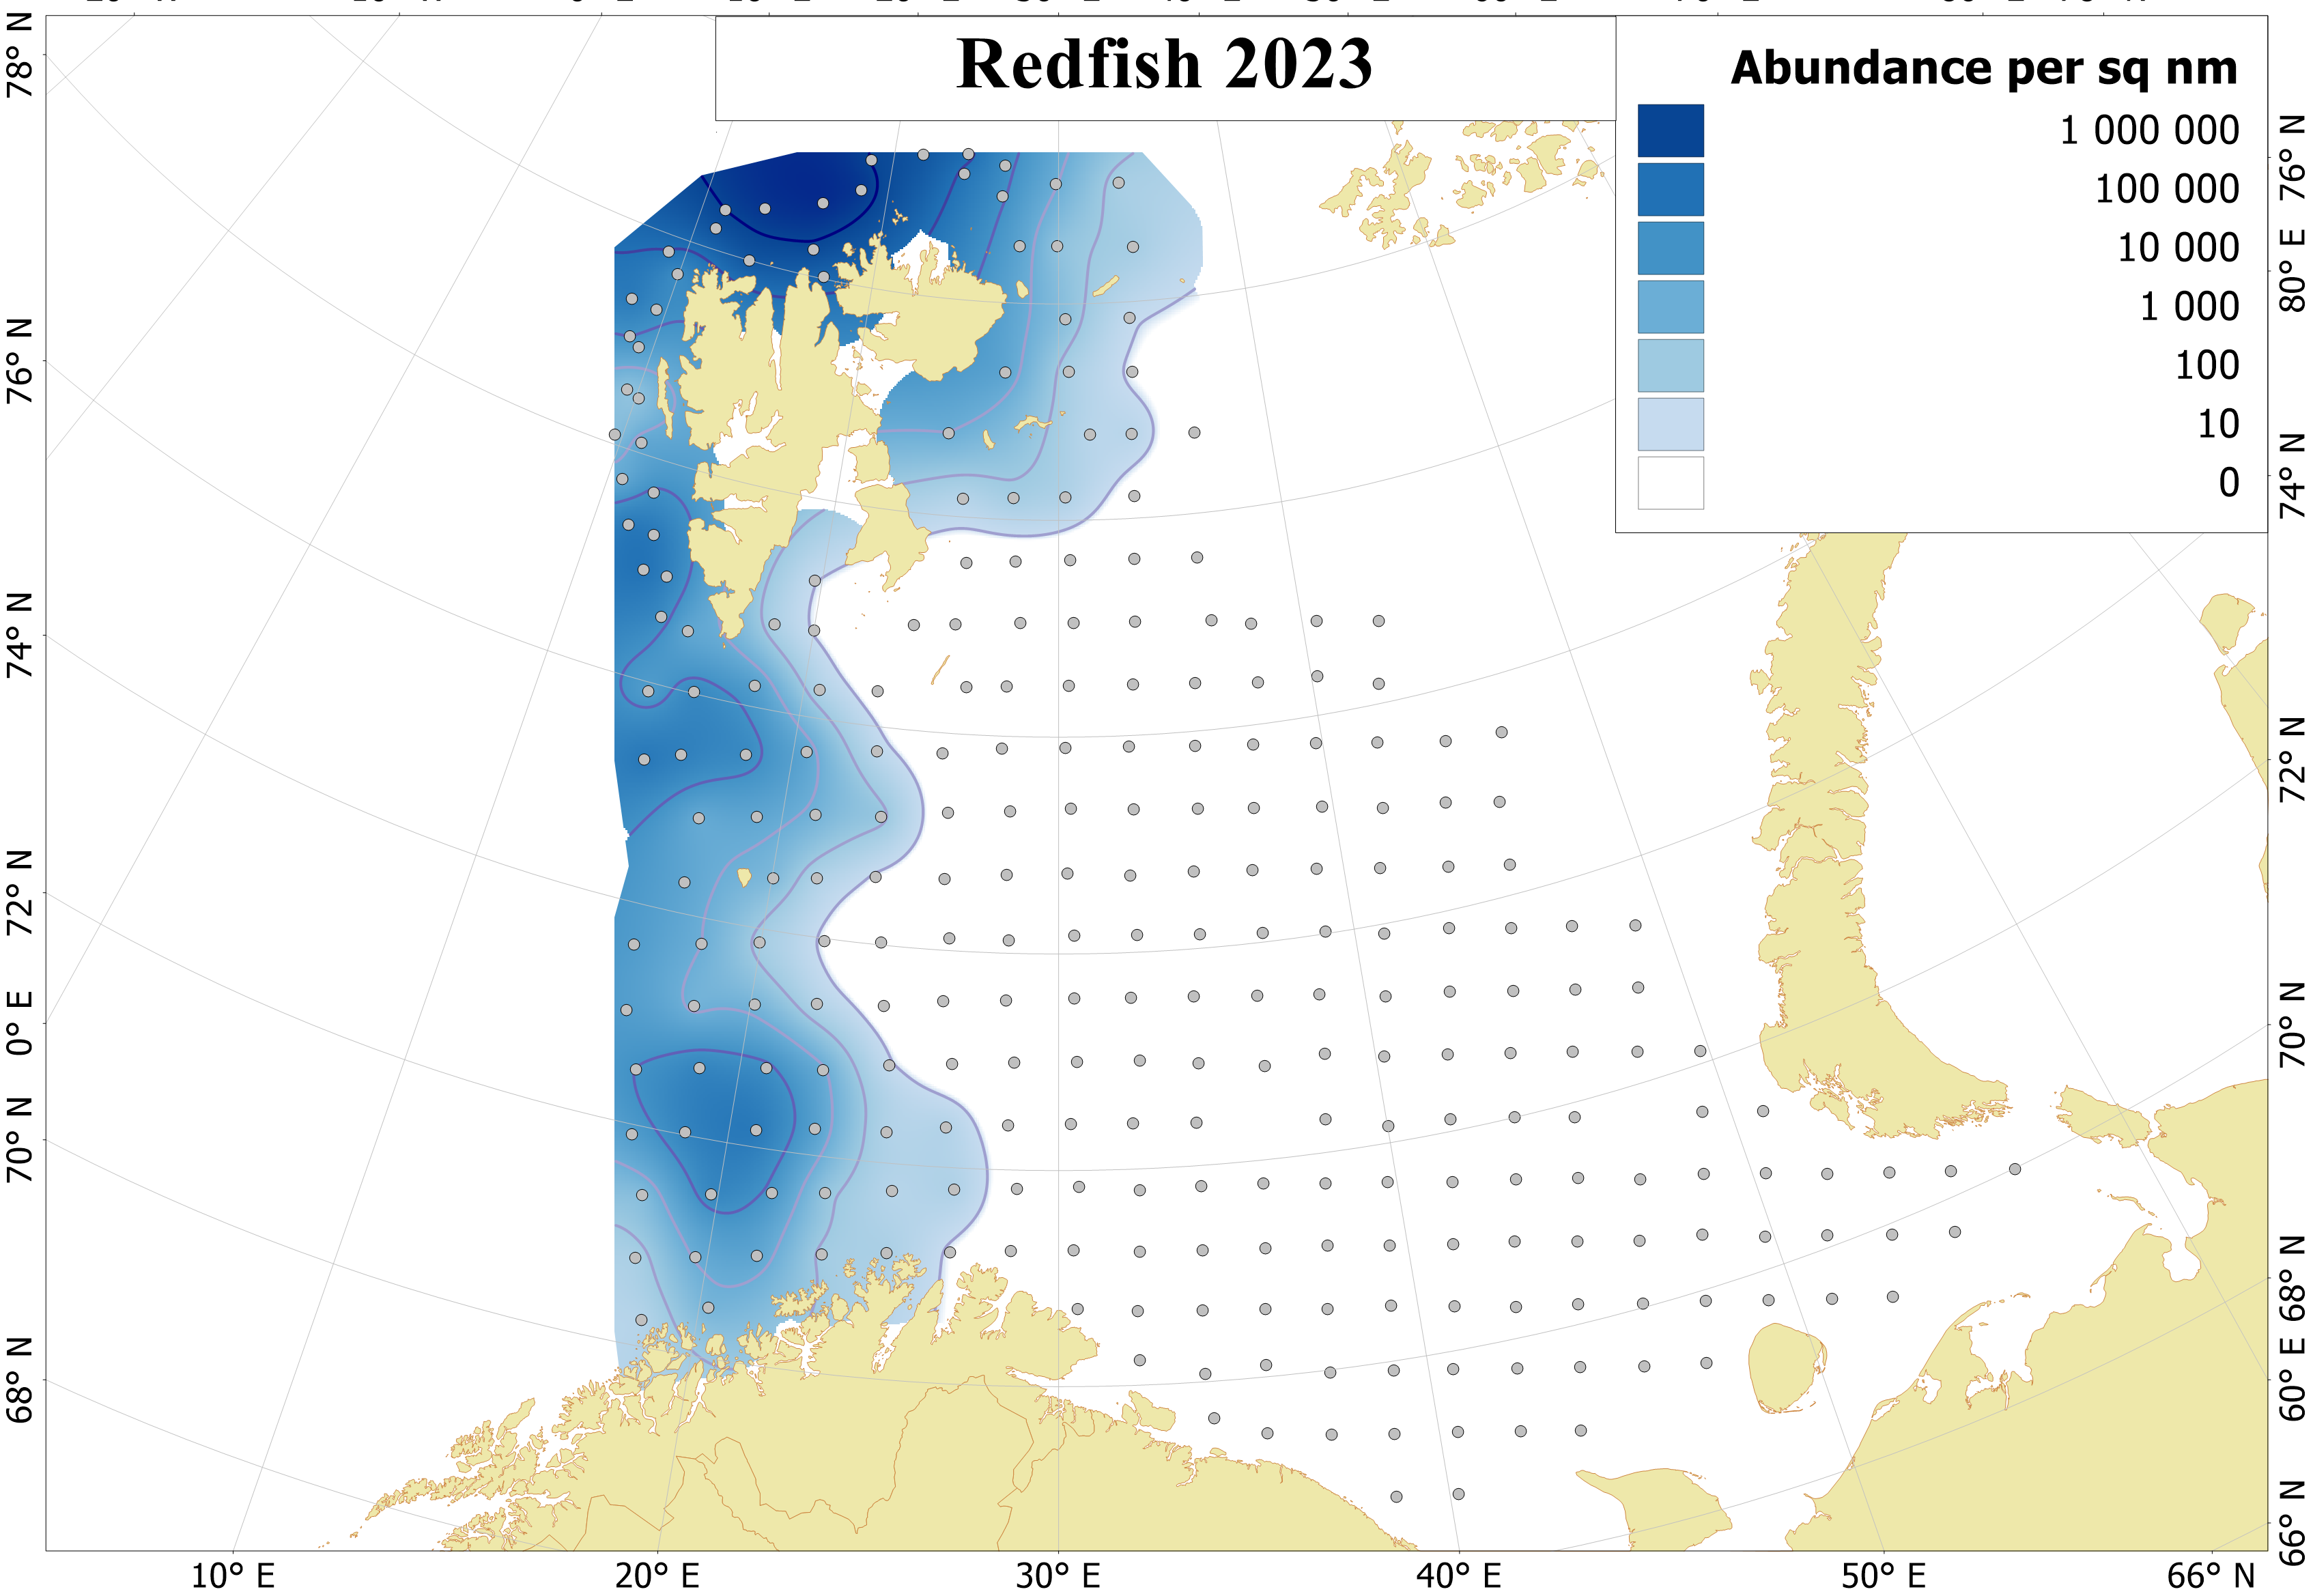 Figure 6.7.1. Distribution of 0-group redfishes (mostly Sebastes mentella) in August-September 2023. Abundance corrected for capture efficiency. Dots indicate sampling locations.